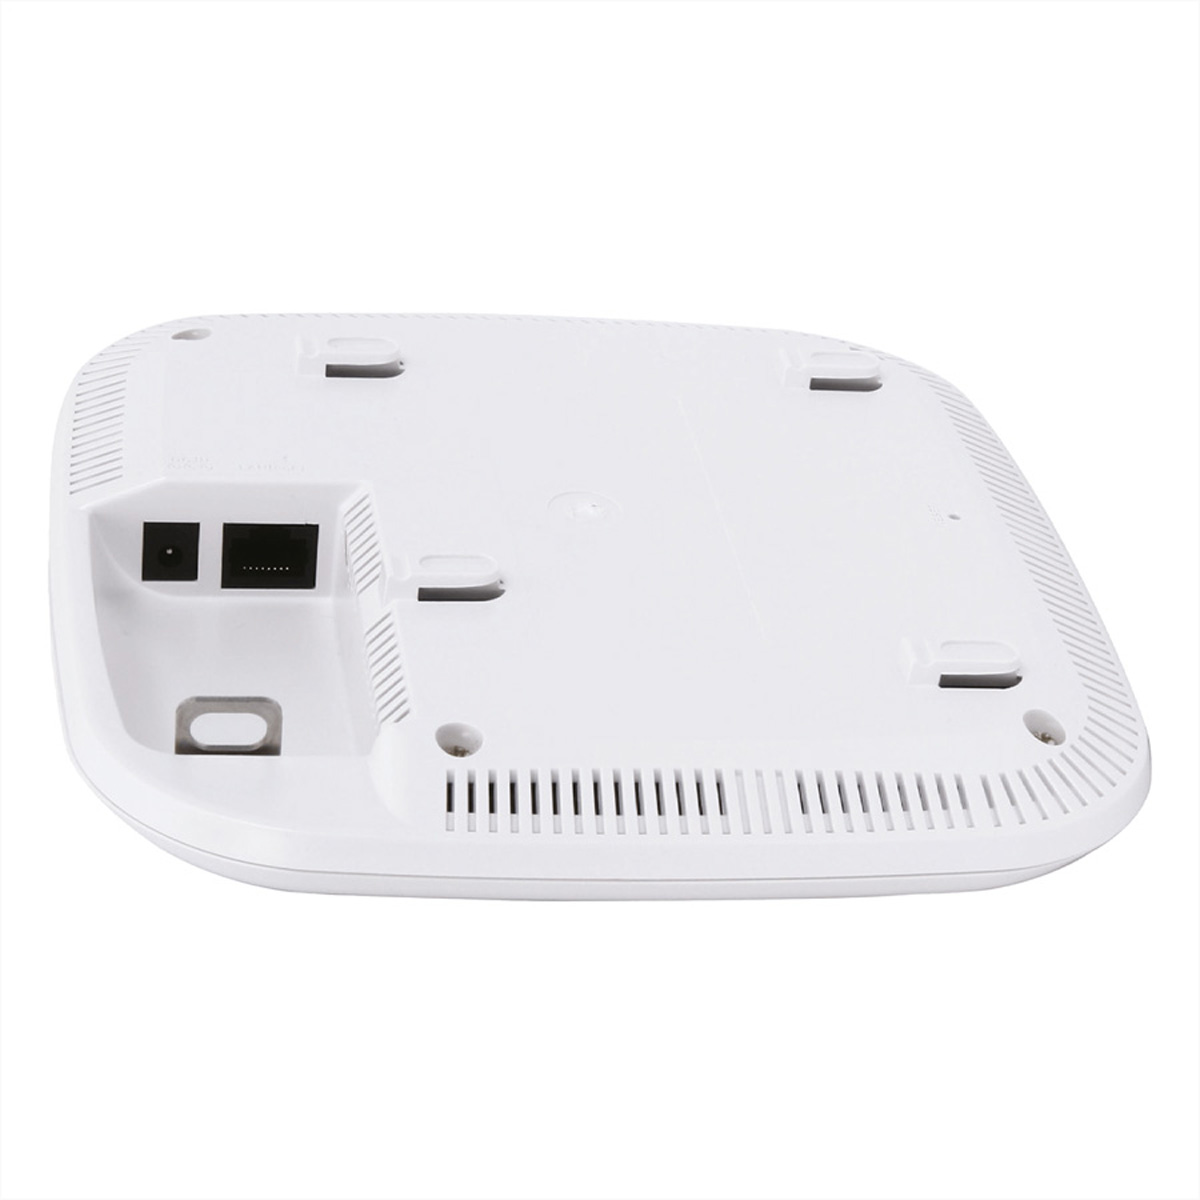 D-LINK DAP-2610 Wireless AC1300 Wave Points 2 1,3 PoE Point Gbit/s WLAN DualBand Access Access